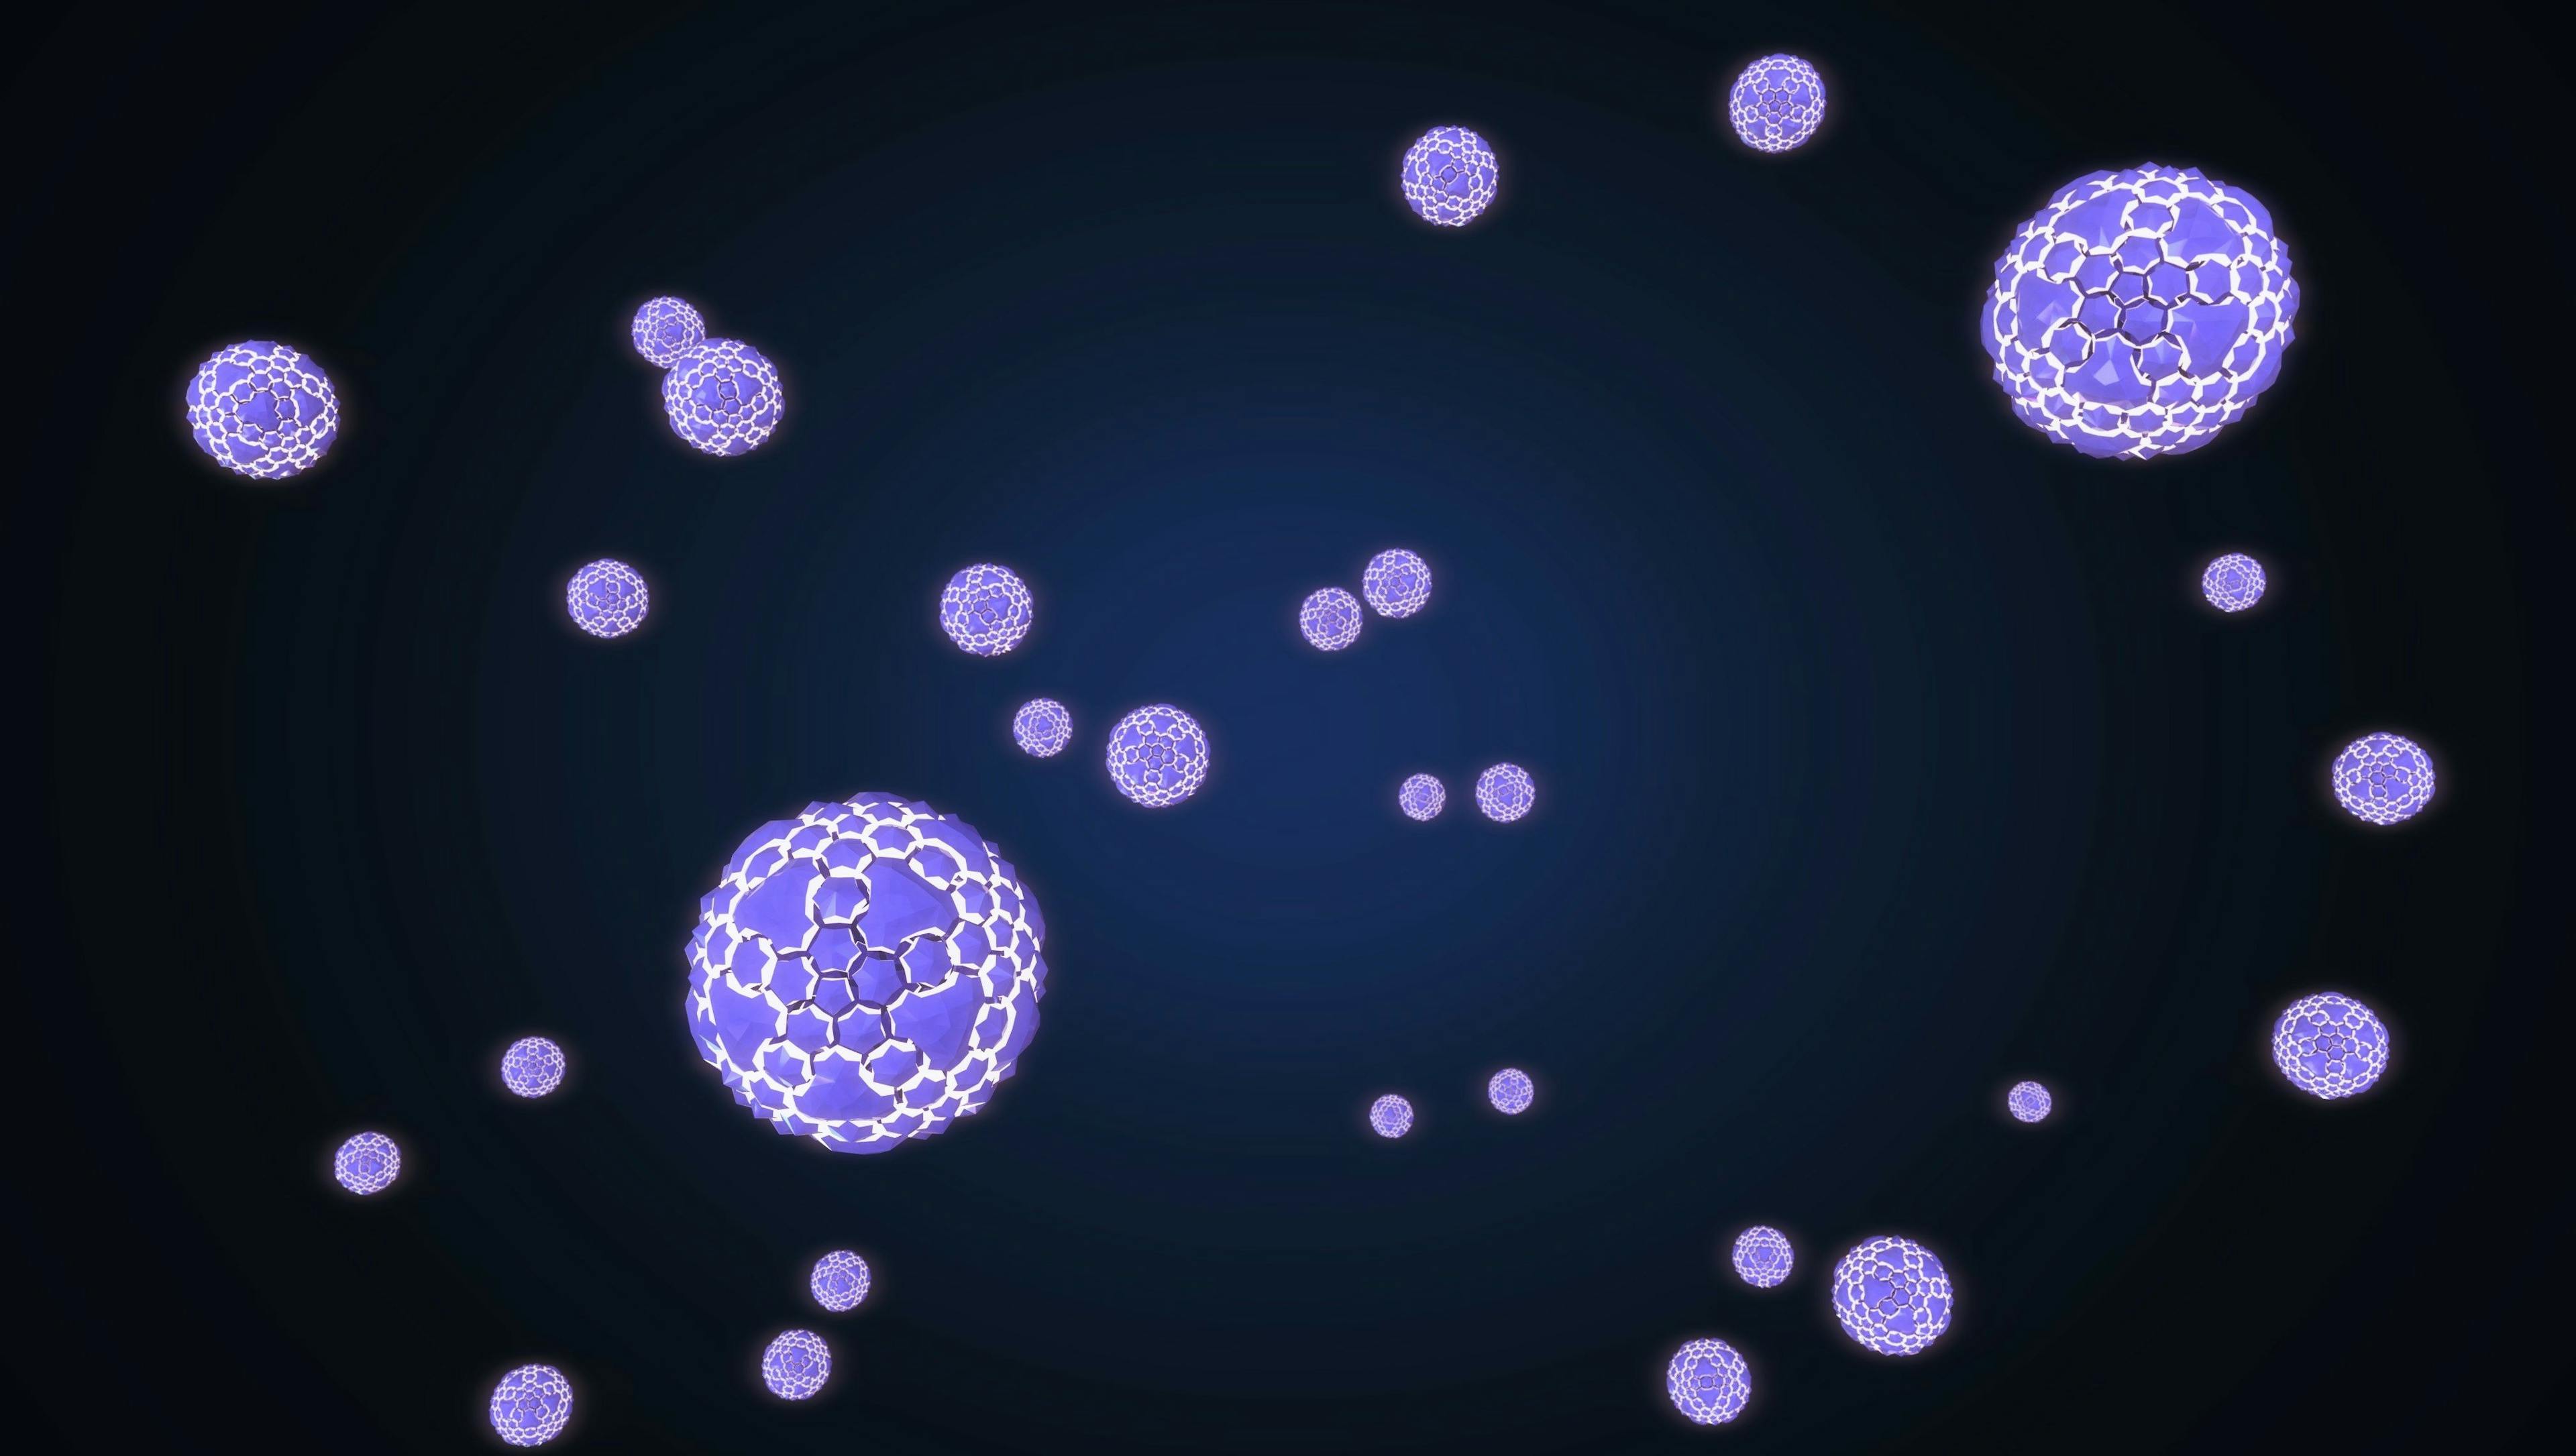 Abstract ions floating in the space, 3d rendering | Image Credit: © Carlos-F-3D - stock.adobe.com